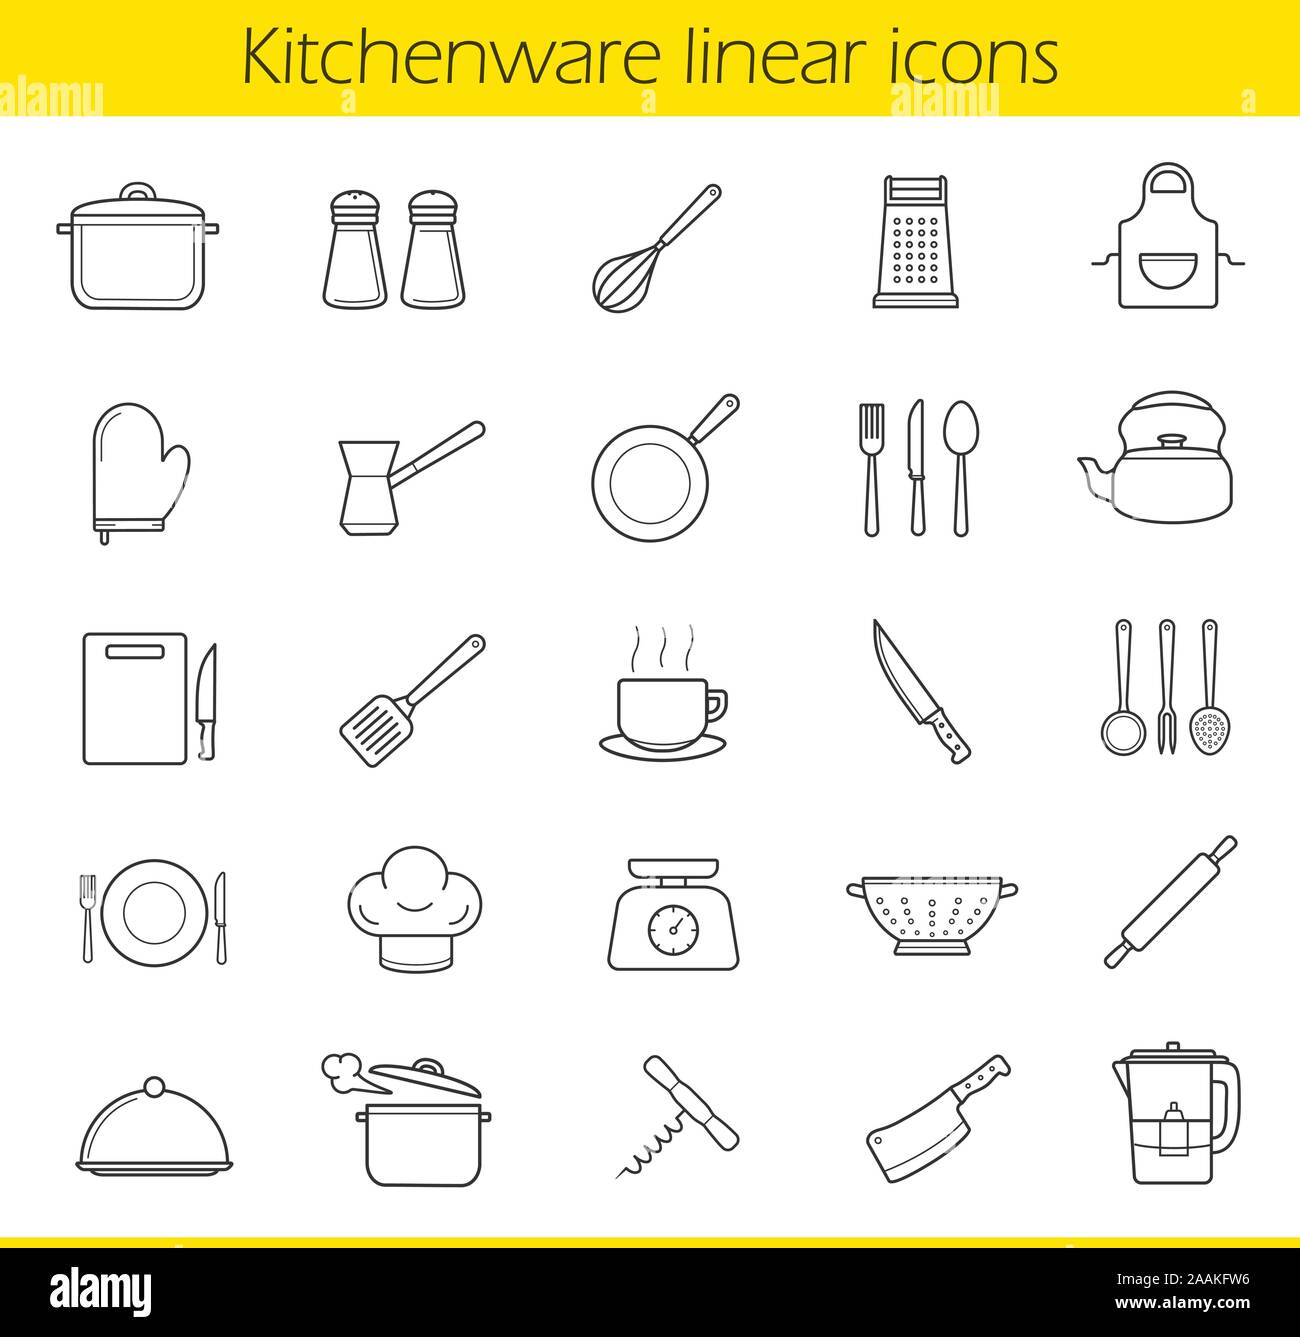 https://c8.alamy.com/comp/2AAKFW6/kitchenware-linear-icons-set-kitchen-tools-and-appliances-thin-line-contour-symbols-household-cooking-utensil-tea-and-coffee-items-restaurant-chef-2AAKFW6.jpg